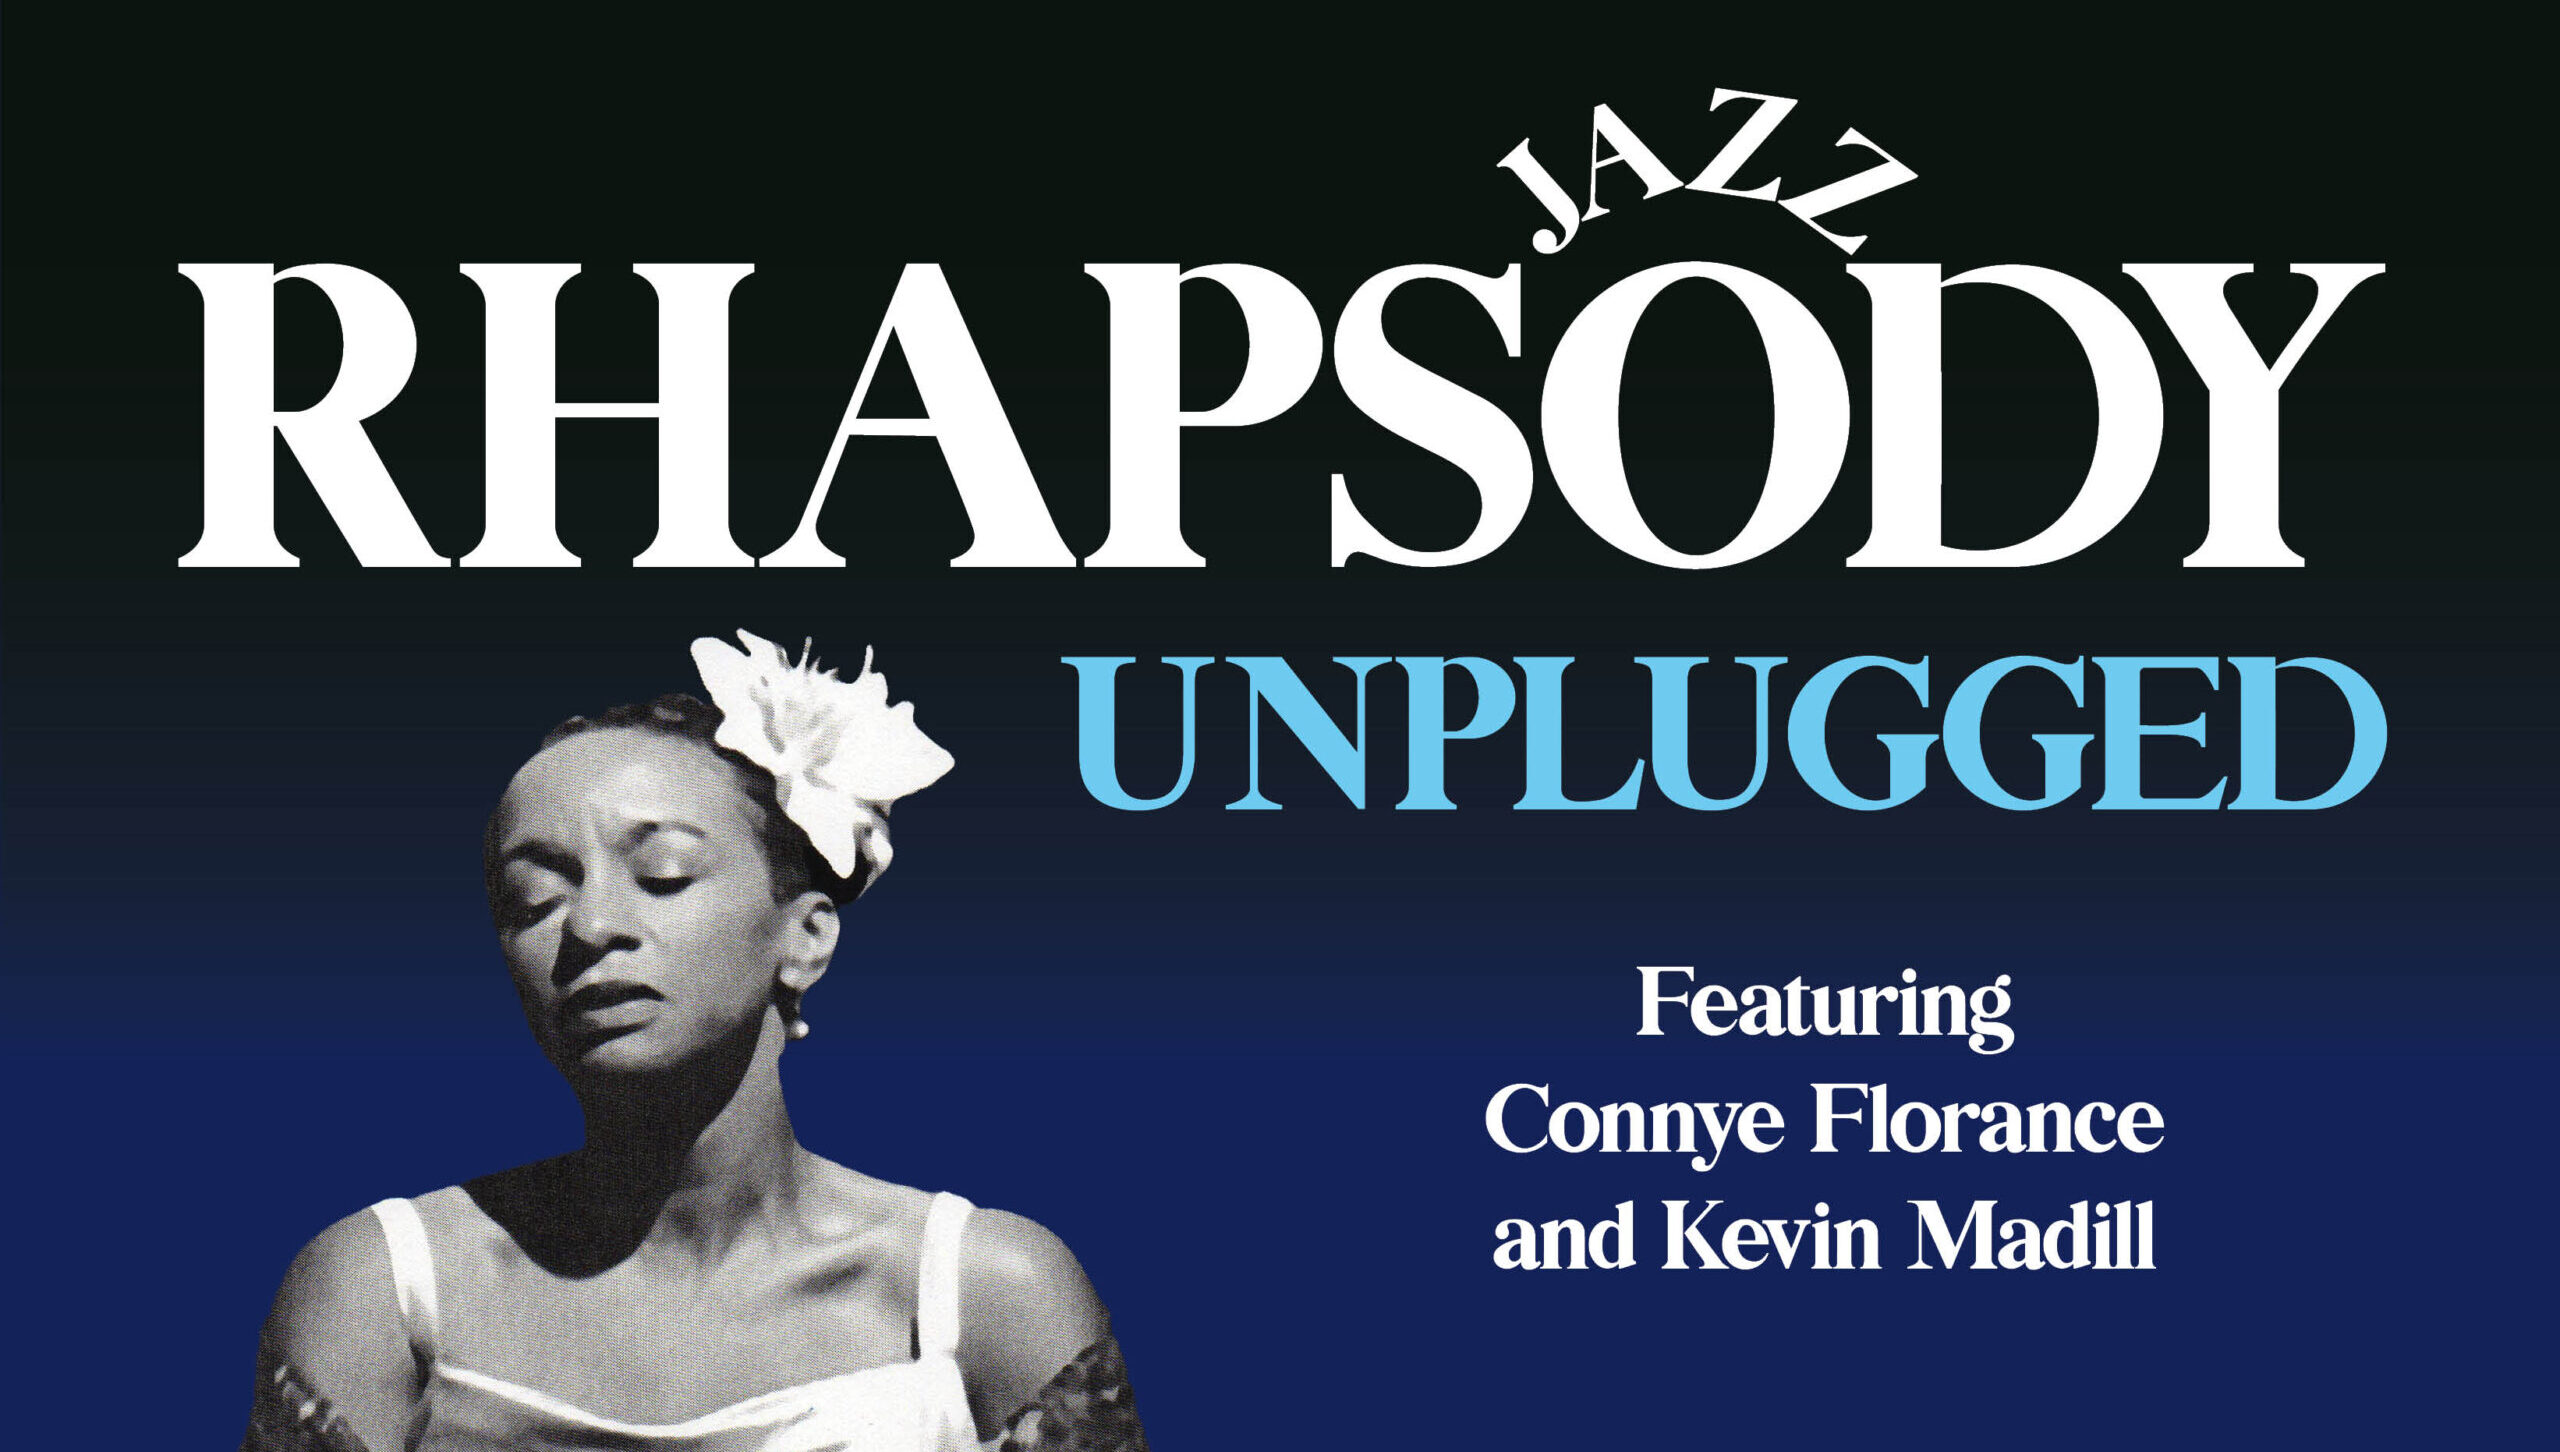 "Jazz Rhapsody Unplugged" ft. Connye Florance and Kevin Madill